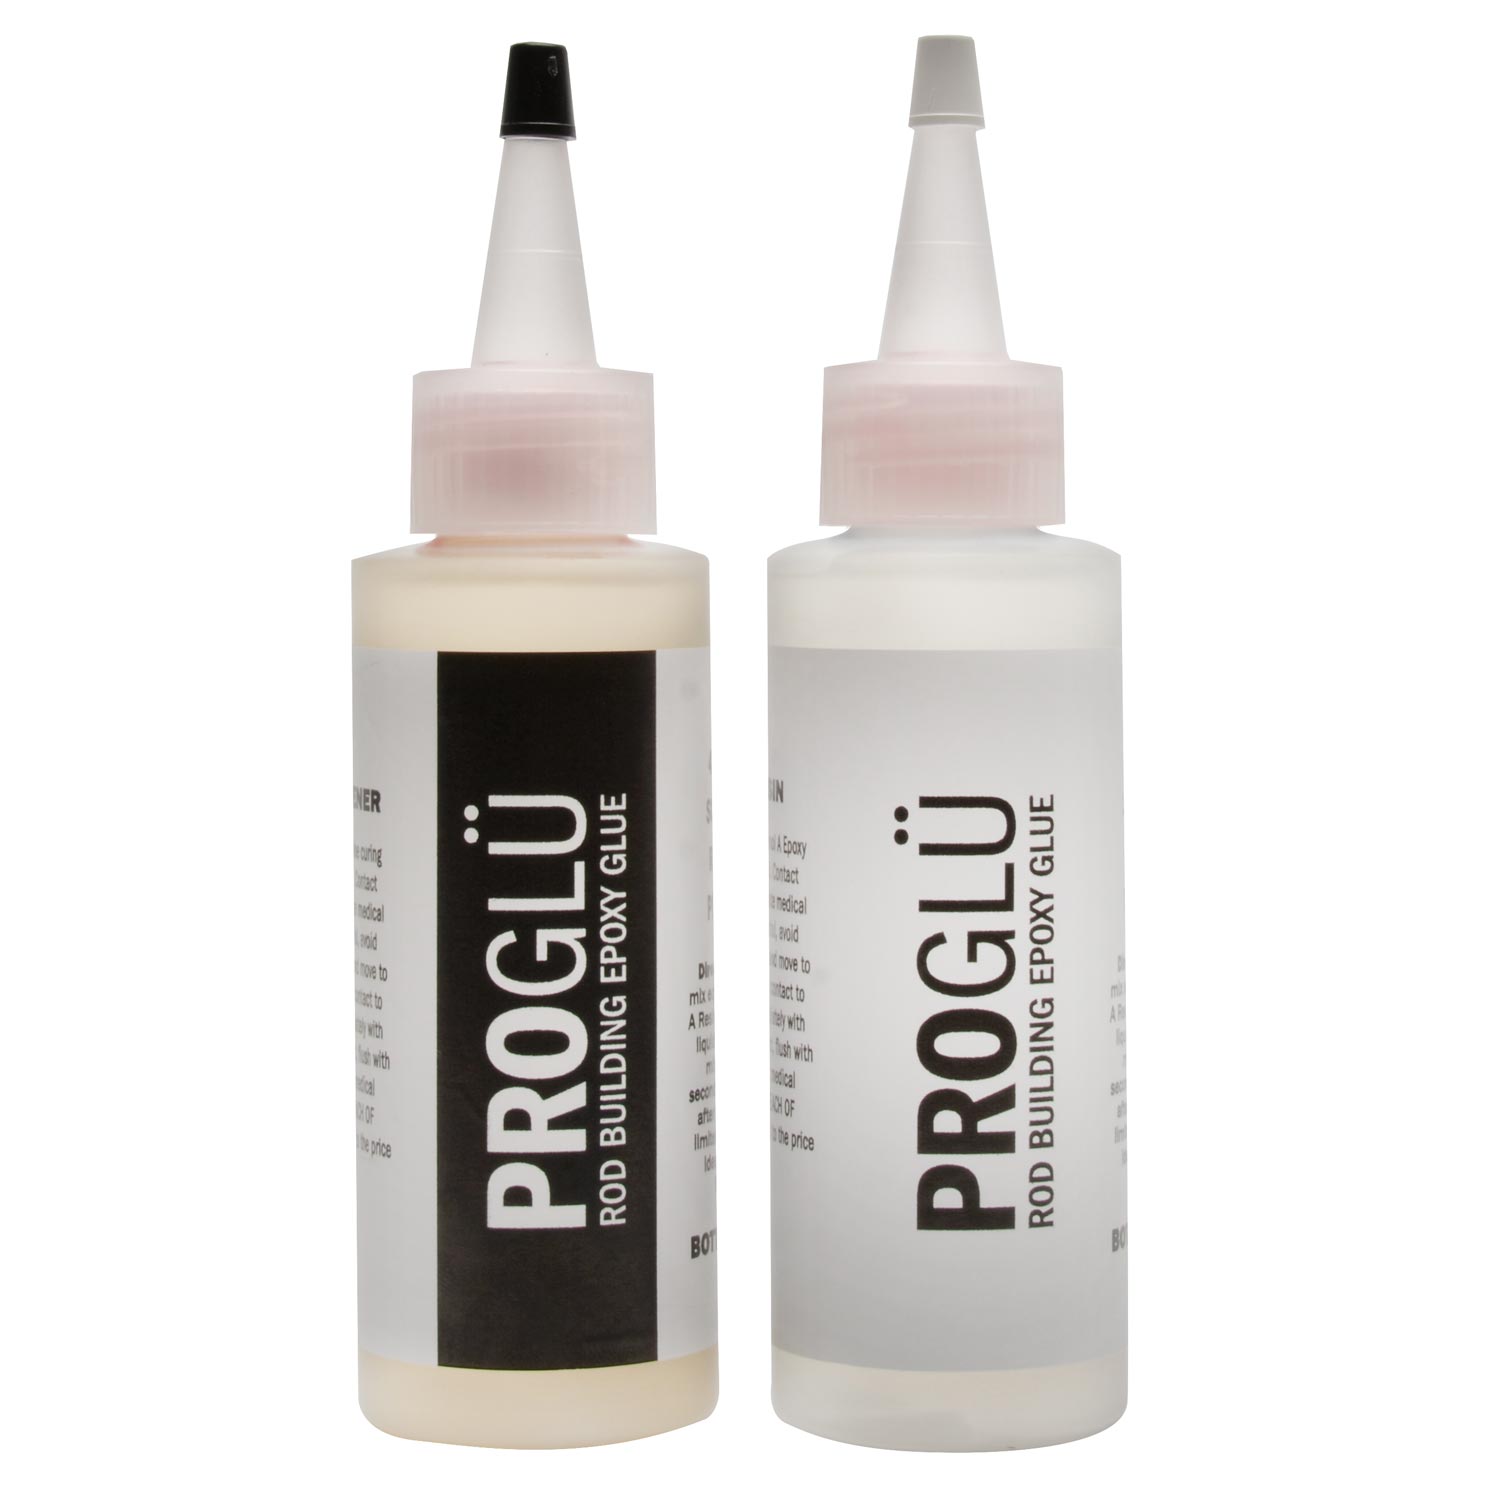 Epoxy & Adhesives for Rod Building - Free Shipping